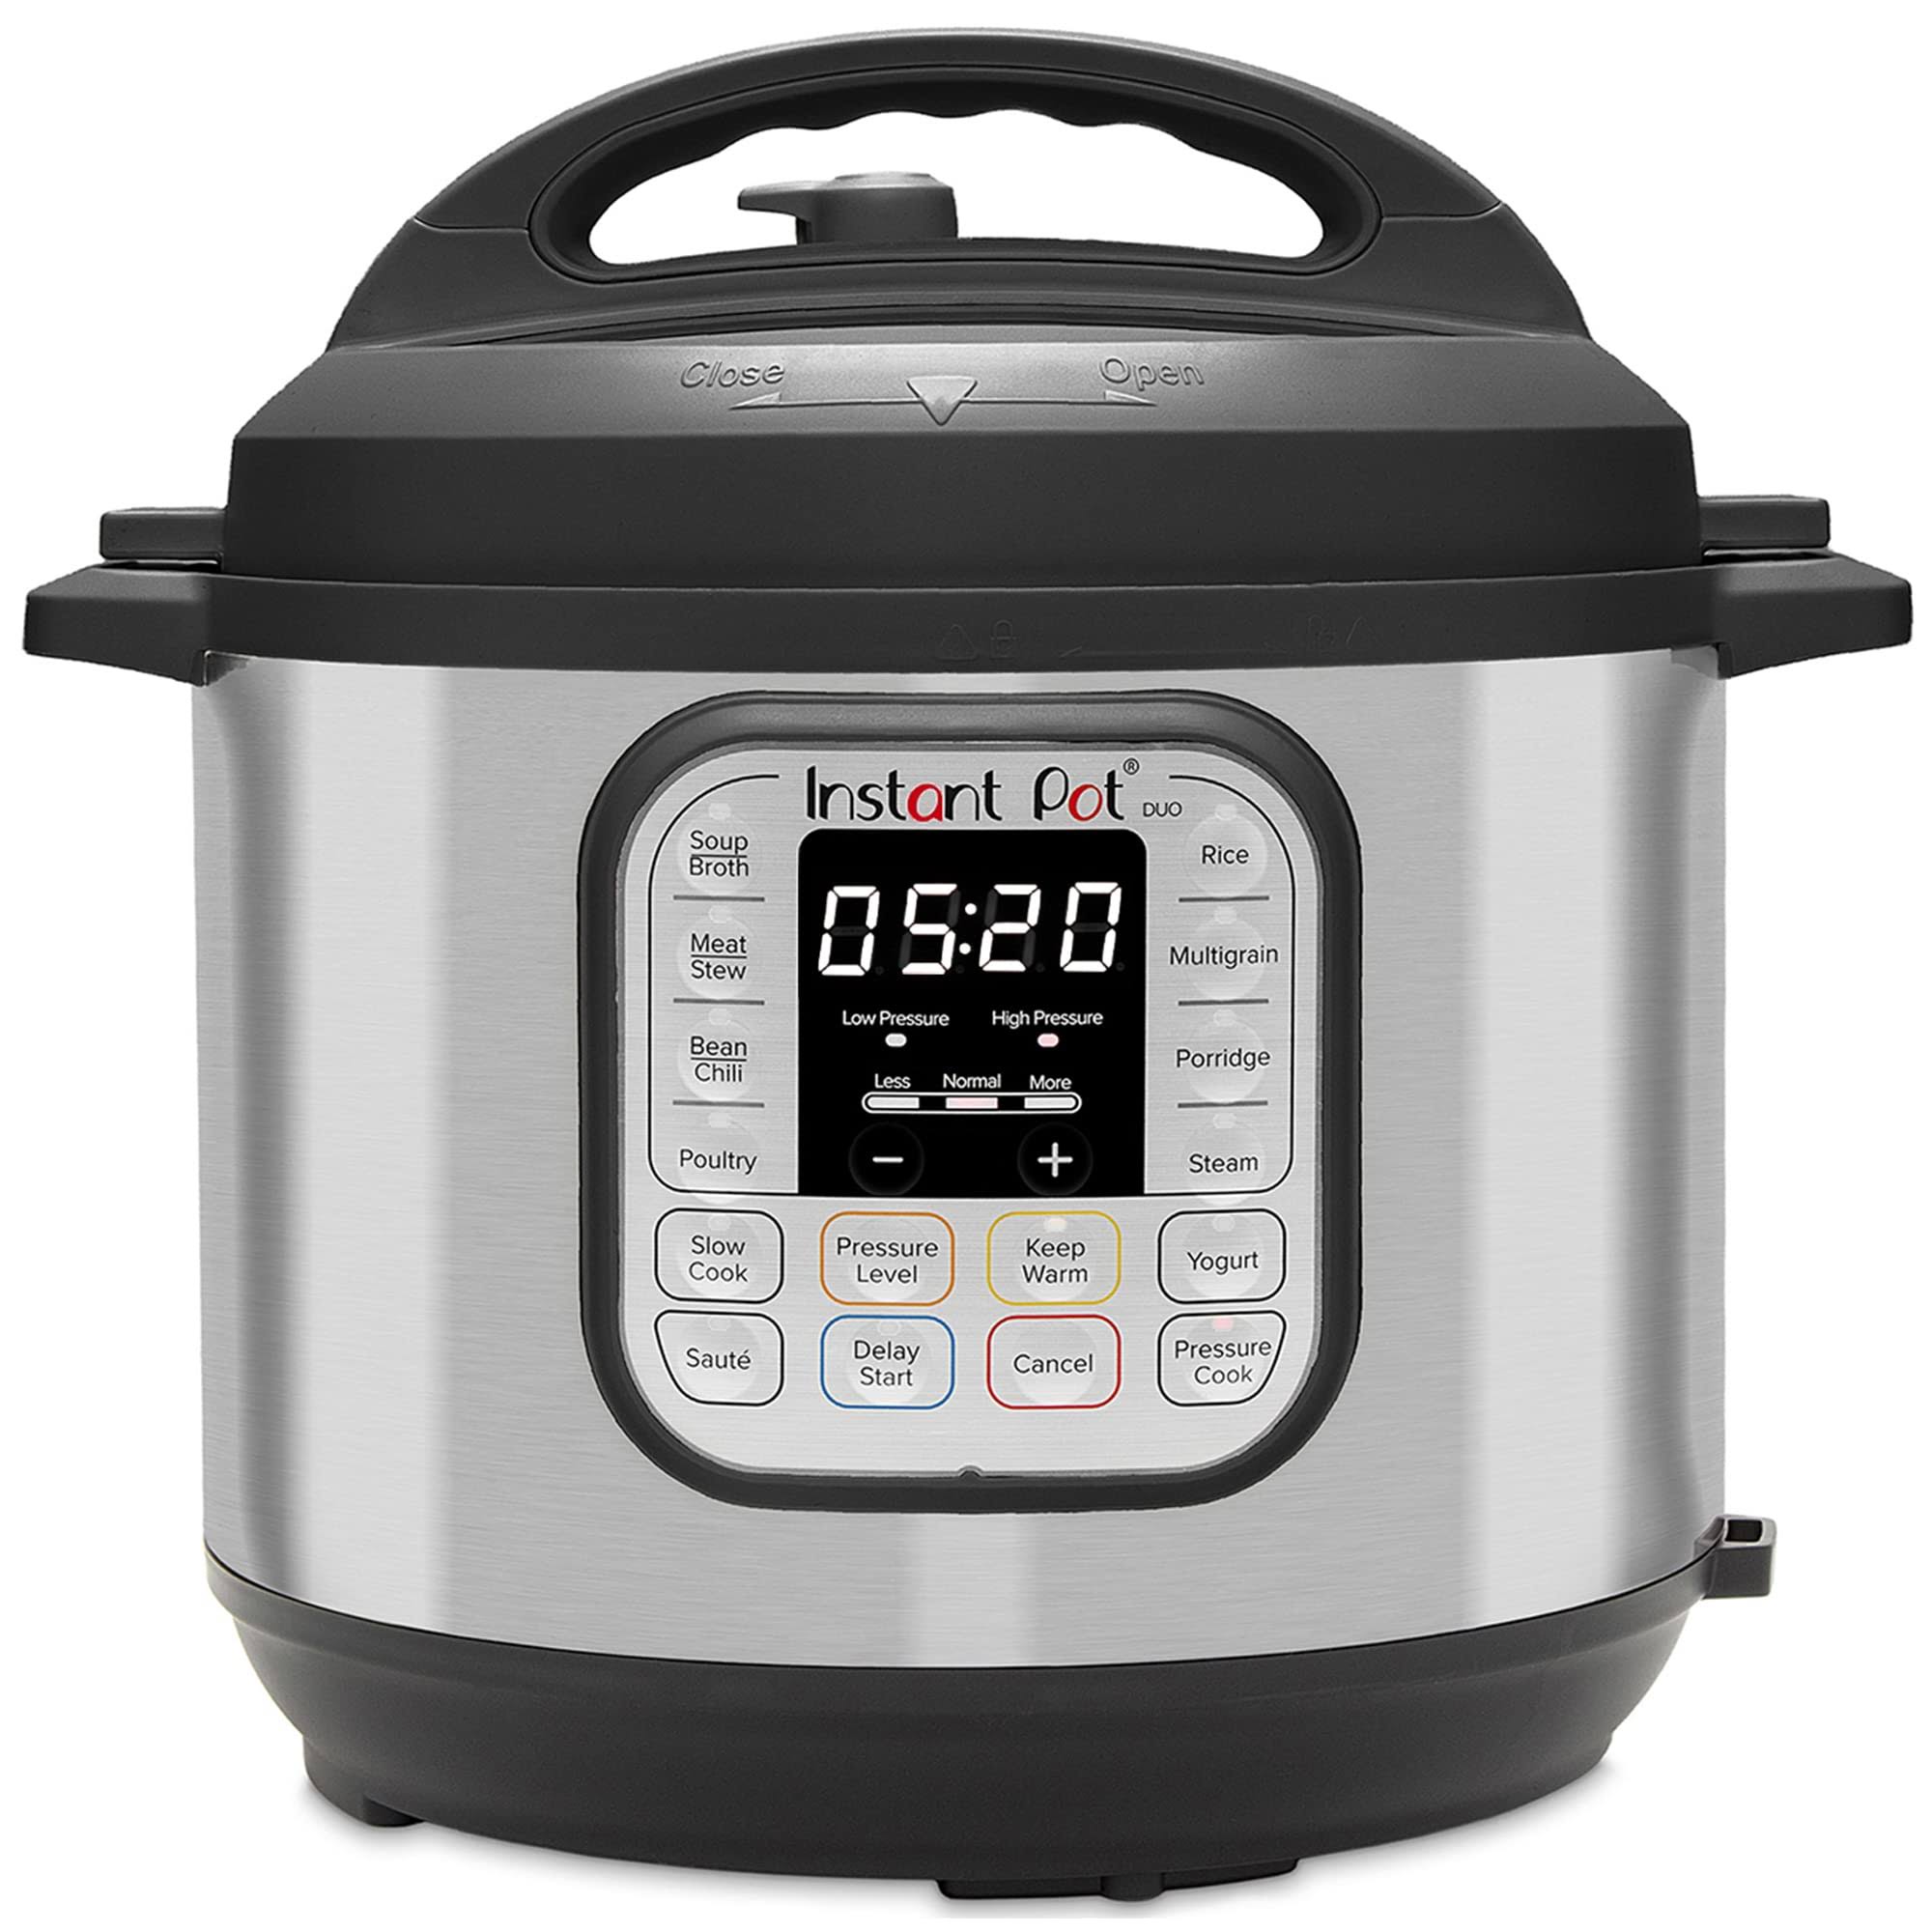 Instant Pot 7-in-1 Multi-Functional Pressure Cooker - Stainless Steel